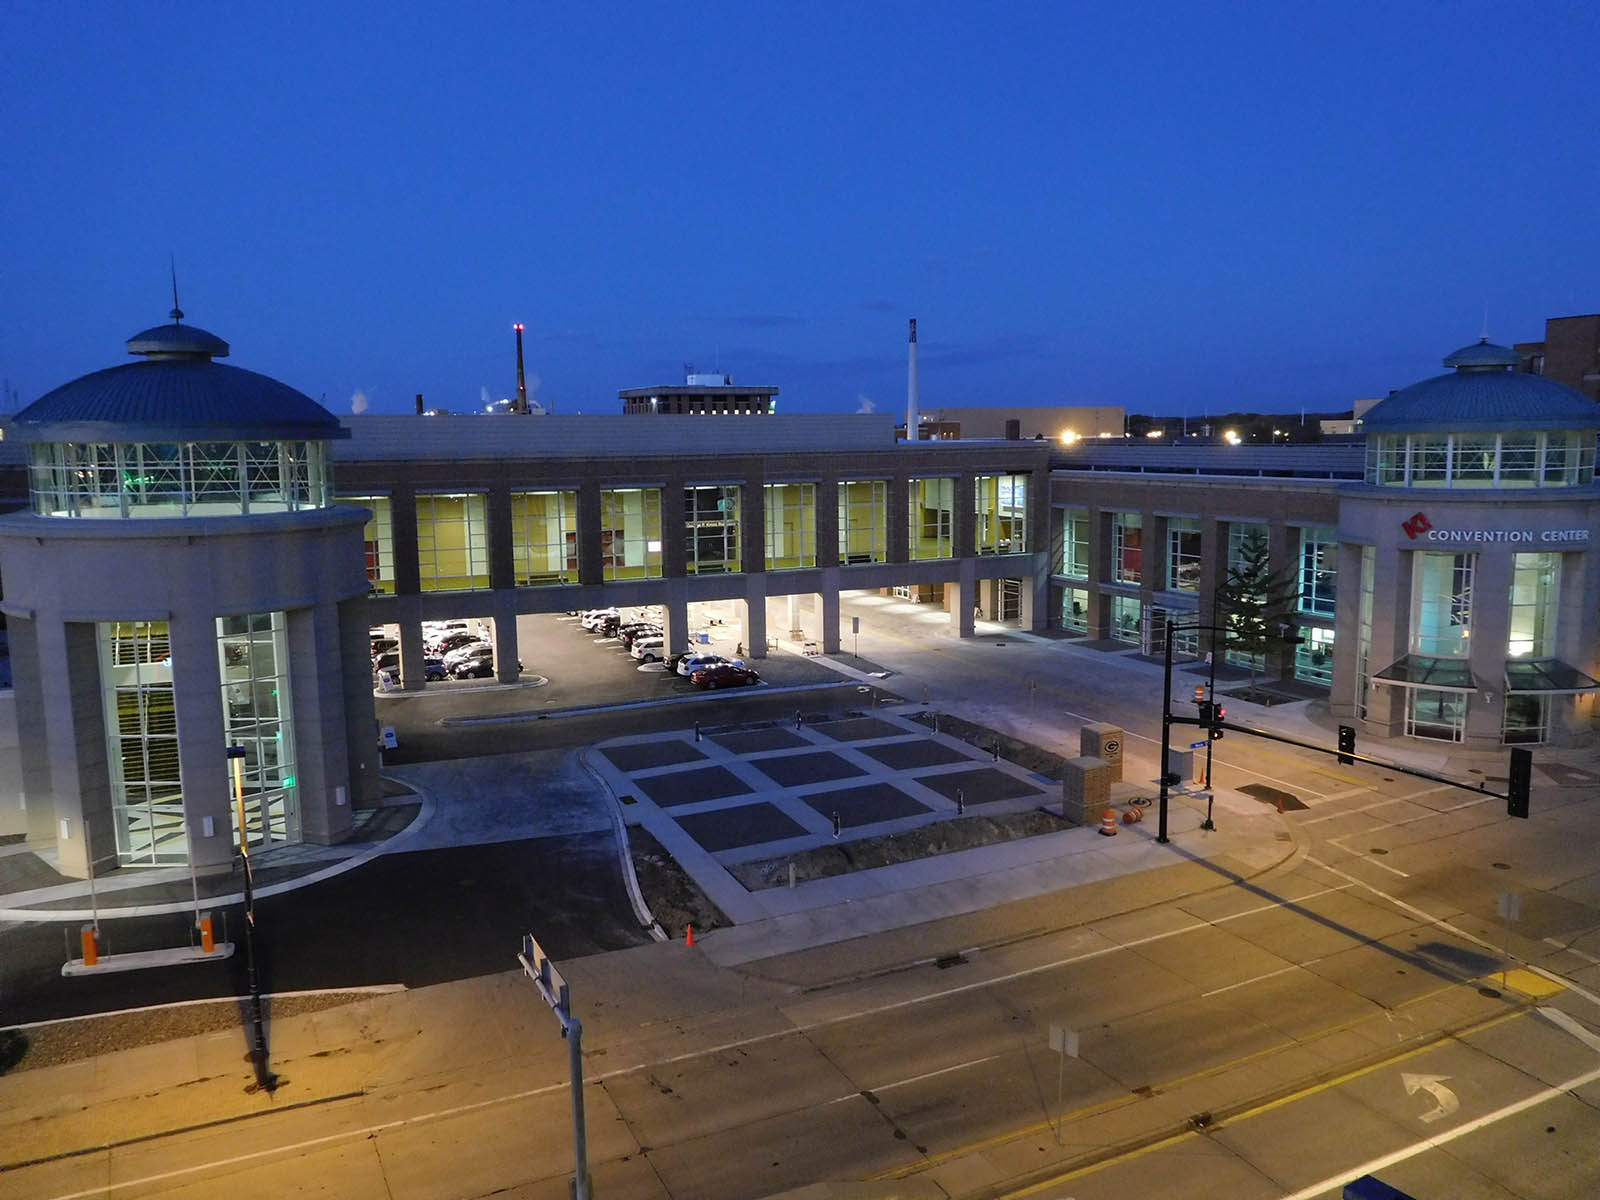 Aerial view of the exterior of the KI Convention Center in downtown Green Bay, WI